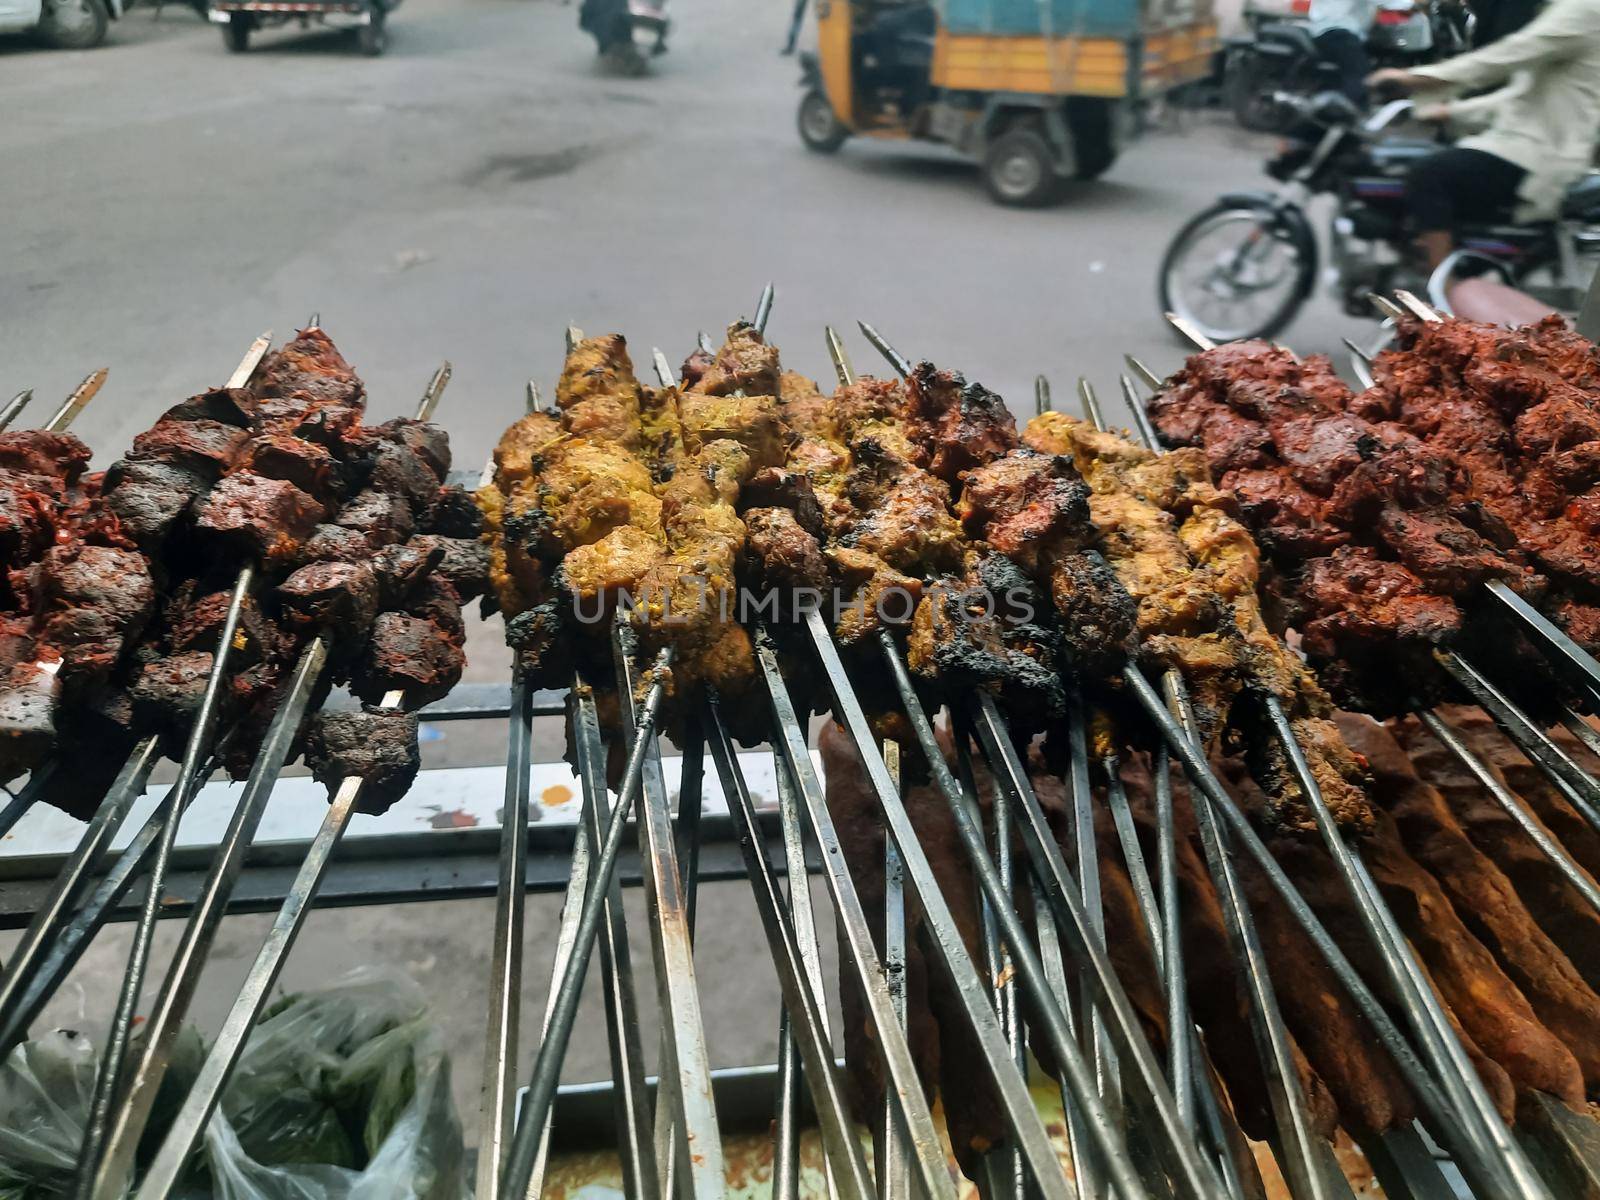 Spicy chicken seekh kababs are being grilled with charcoal in barbeque with metal skewers,at evening for sale as street food in Old Delhi market. It is famous for spicy non vegetarian street foods.